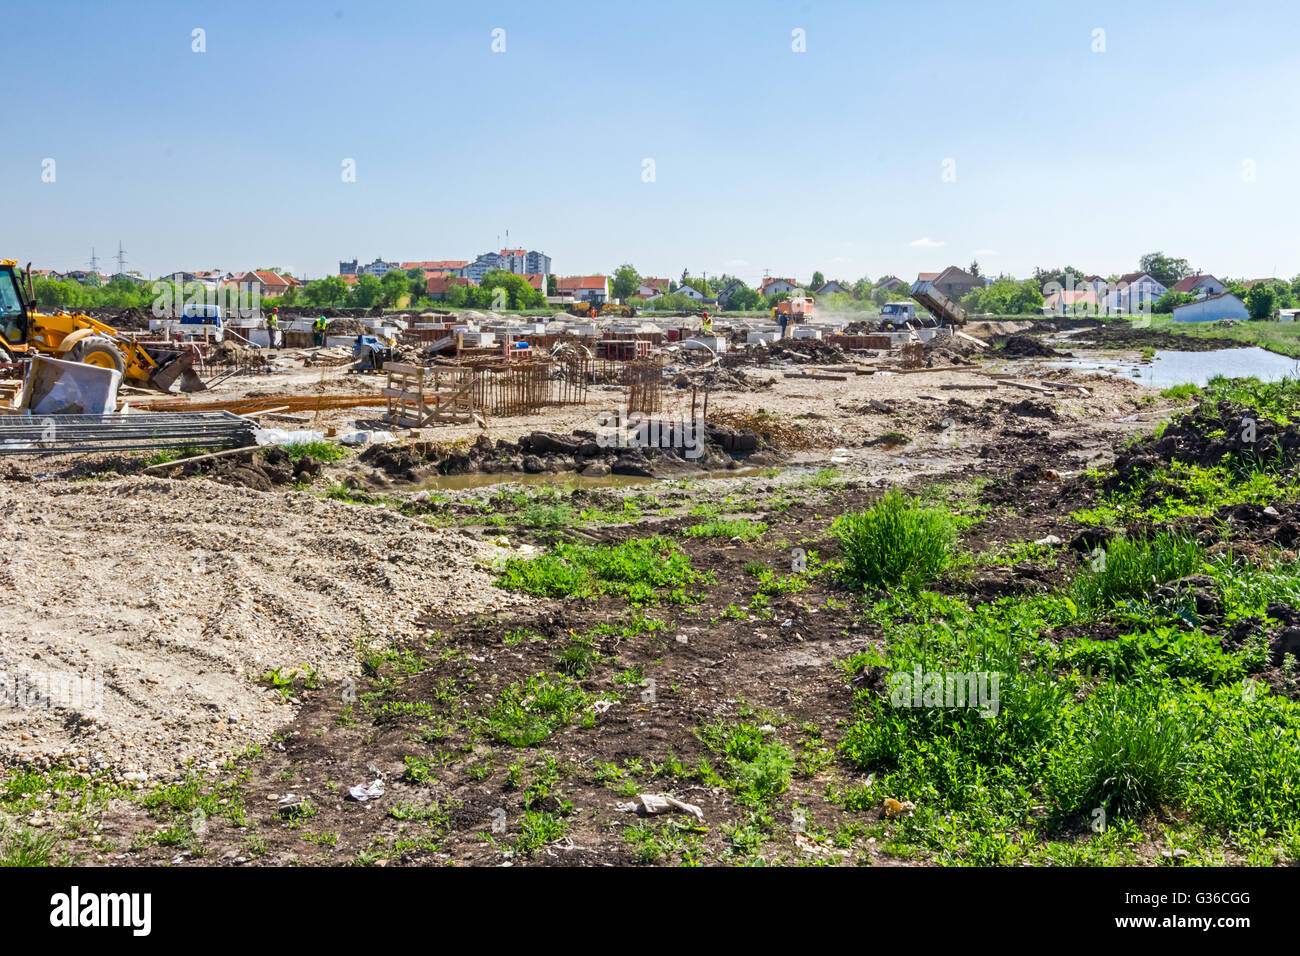 Landscape transform into urban area with machinery, people are working. View on construction site. Stock Photo